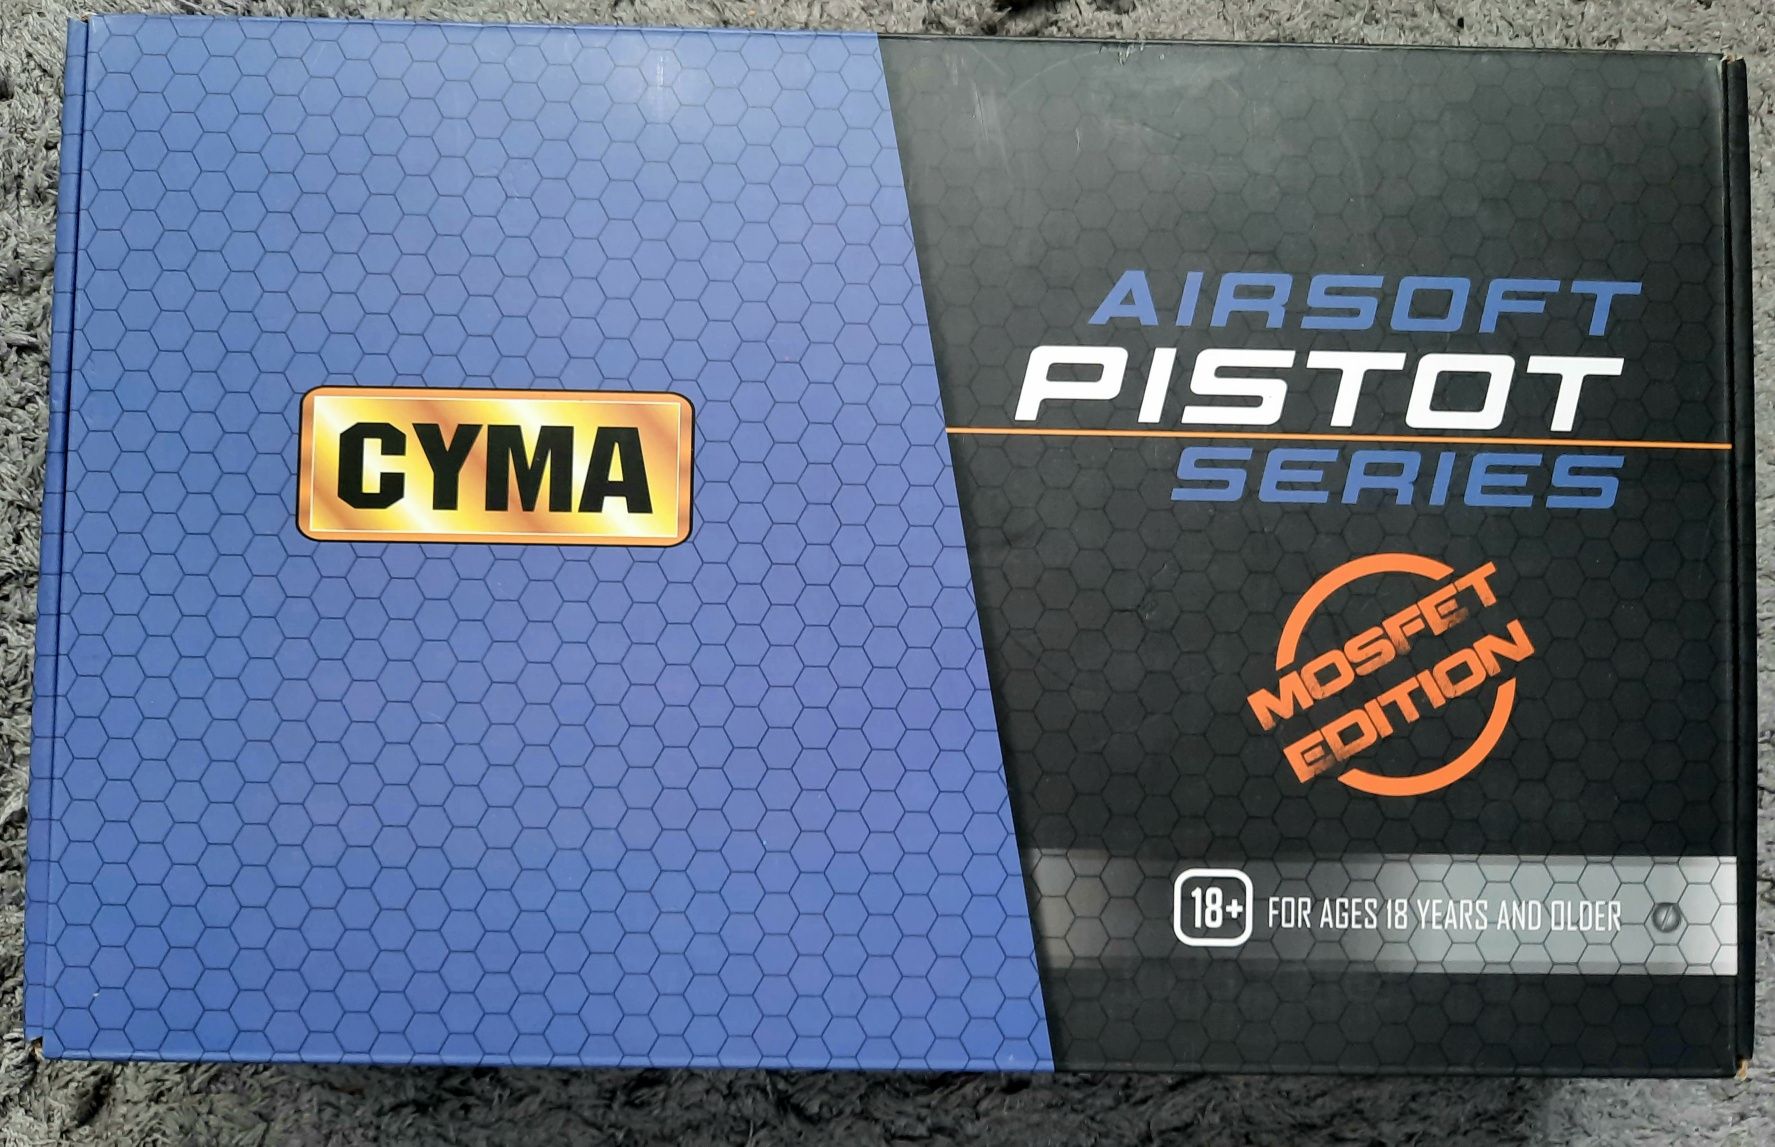 Replica Pistol Airsoft Electric CM.128S Mosfet Edition Cyma